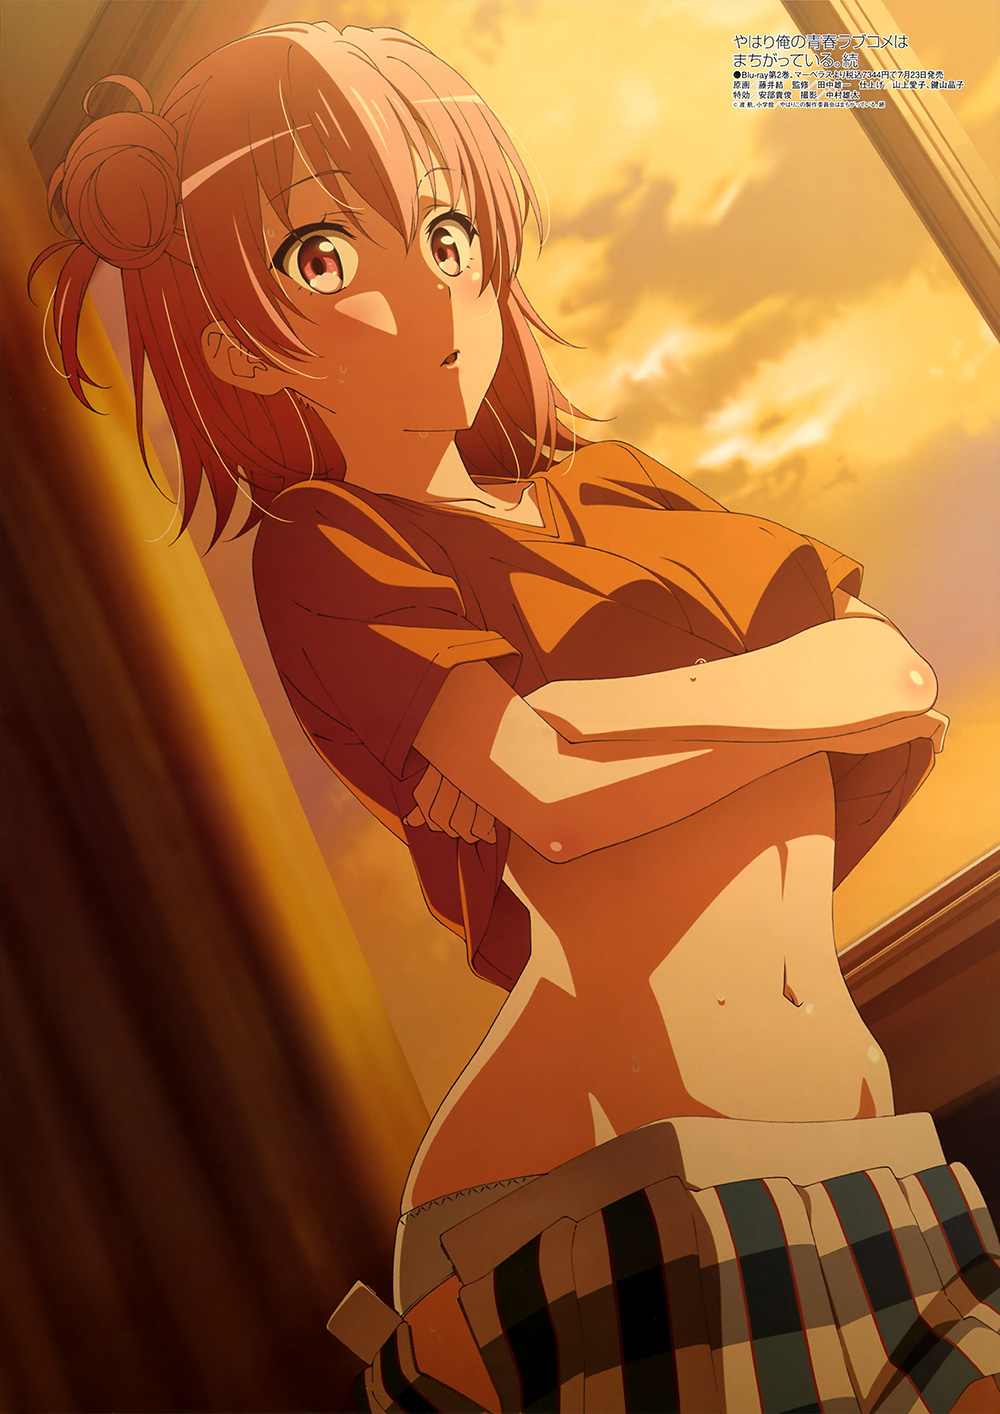 Sneak-Peak-of-Yui-Yuigahama-from-Latest-Issue-of-Megami-Tw